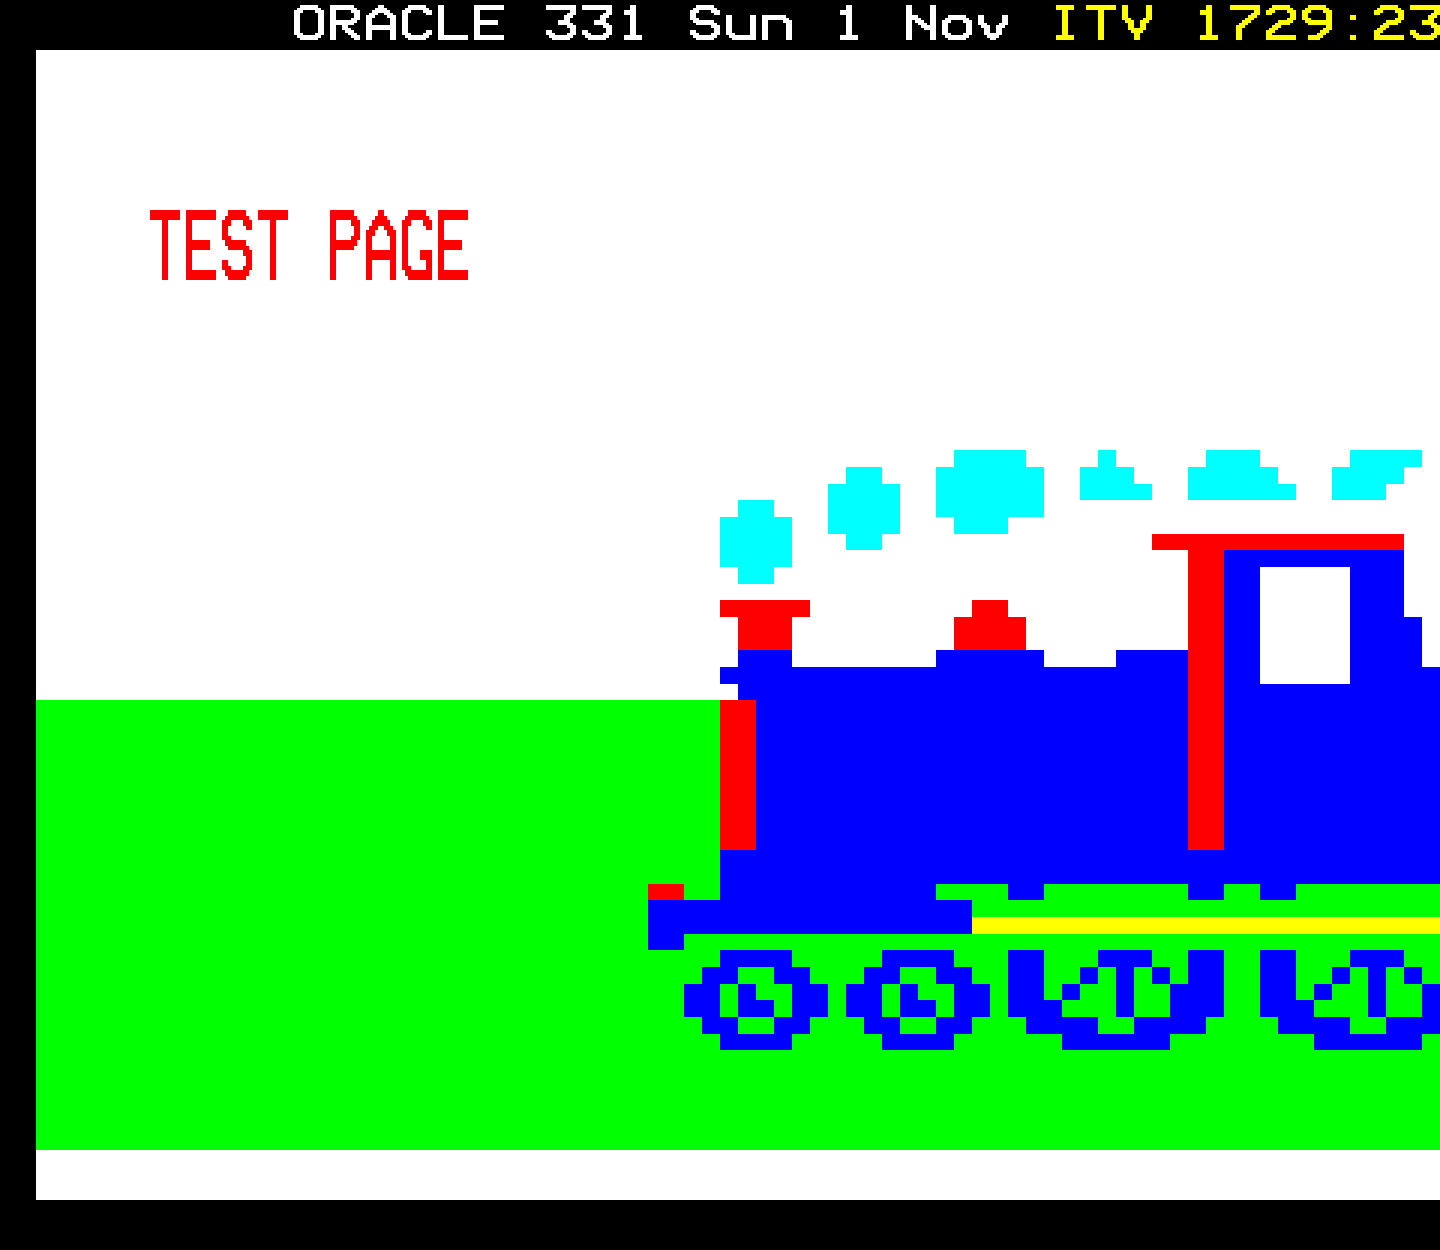 Oracle animated steam train test page.